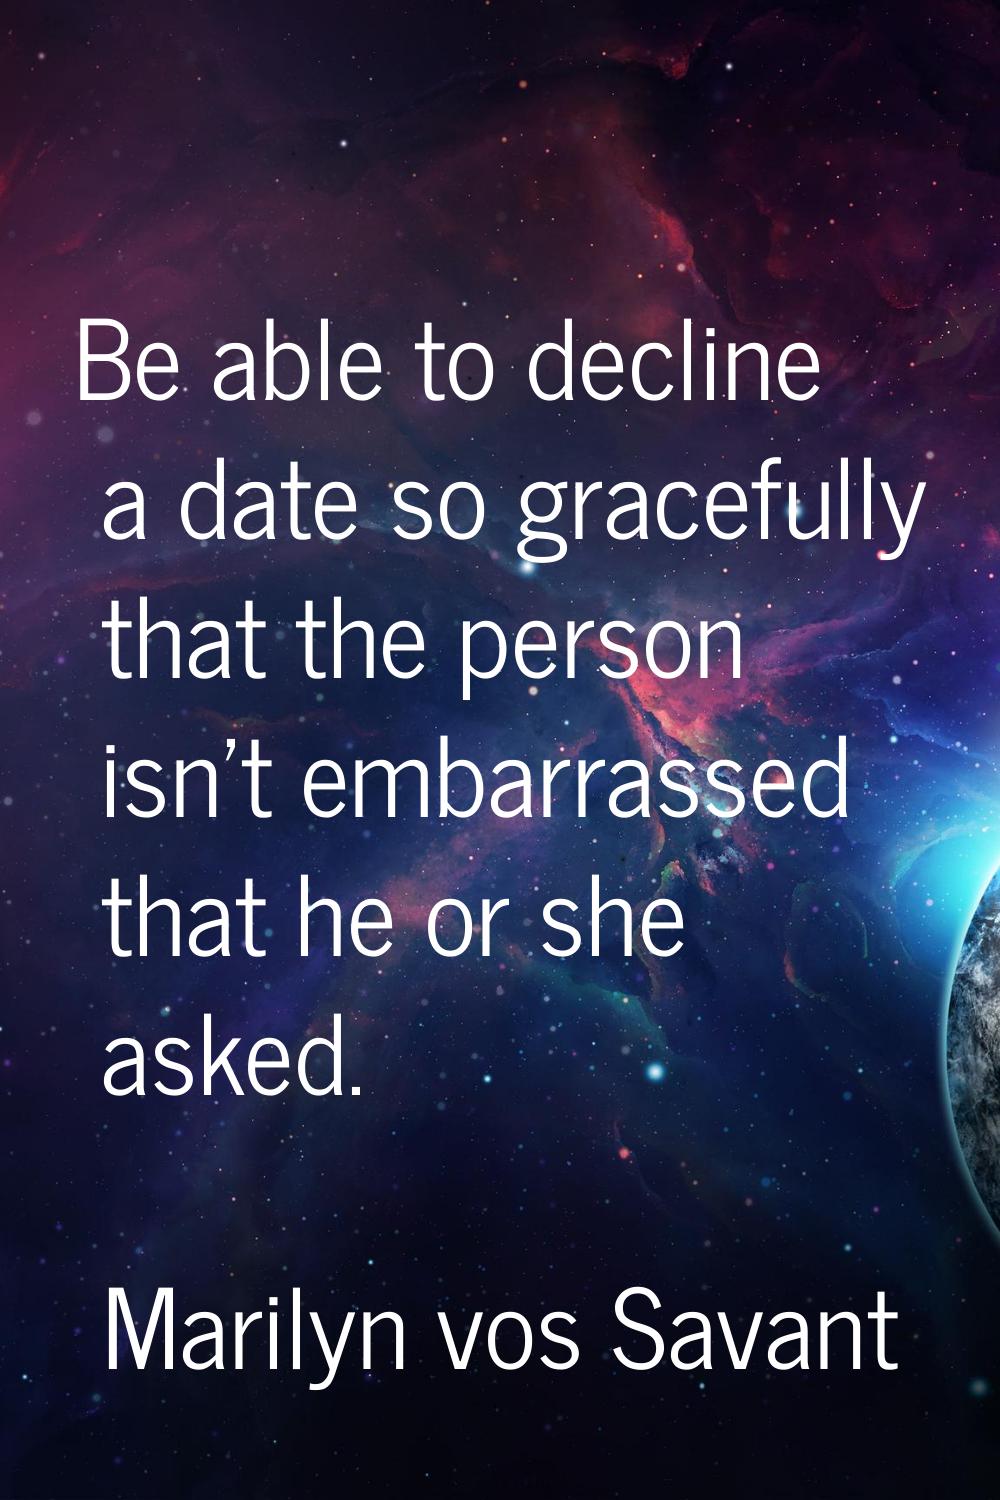 Be able to decline a date so gracefully that the person isn't embarrassed that he or she asked.